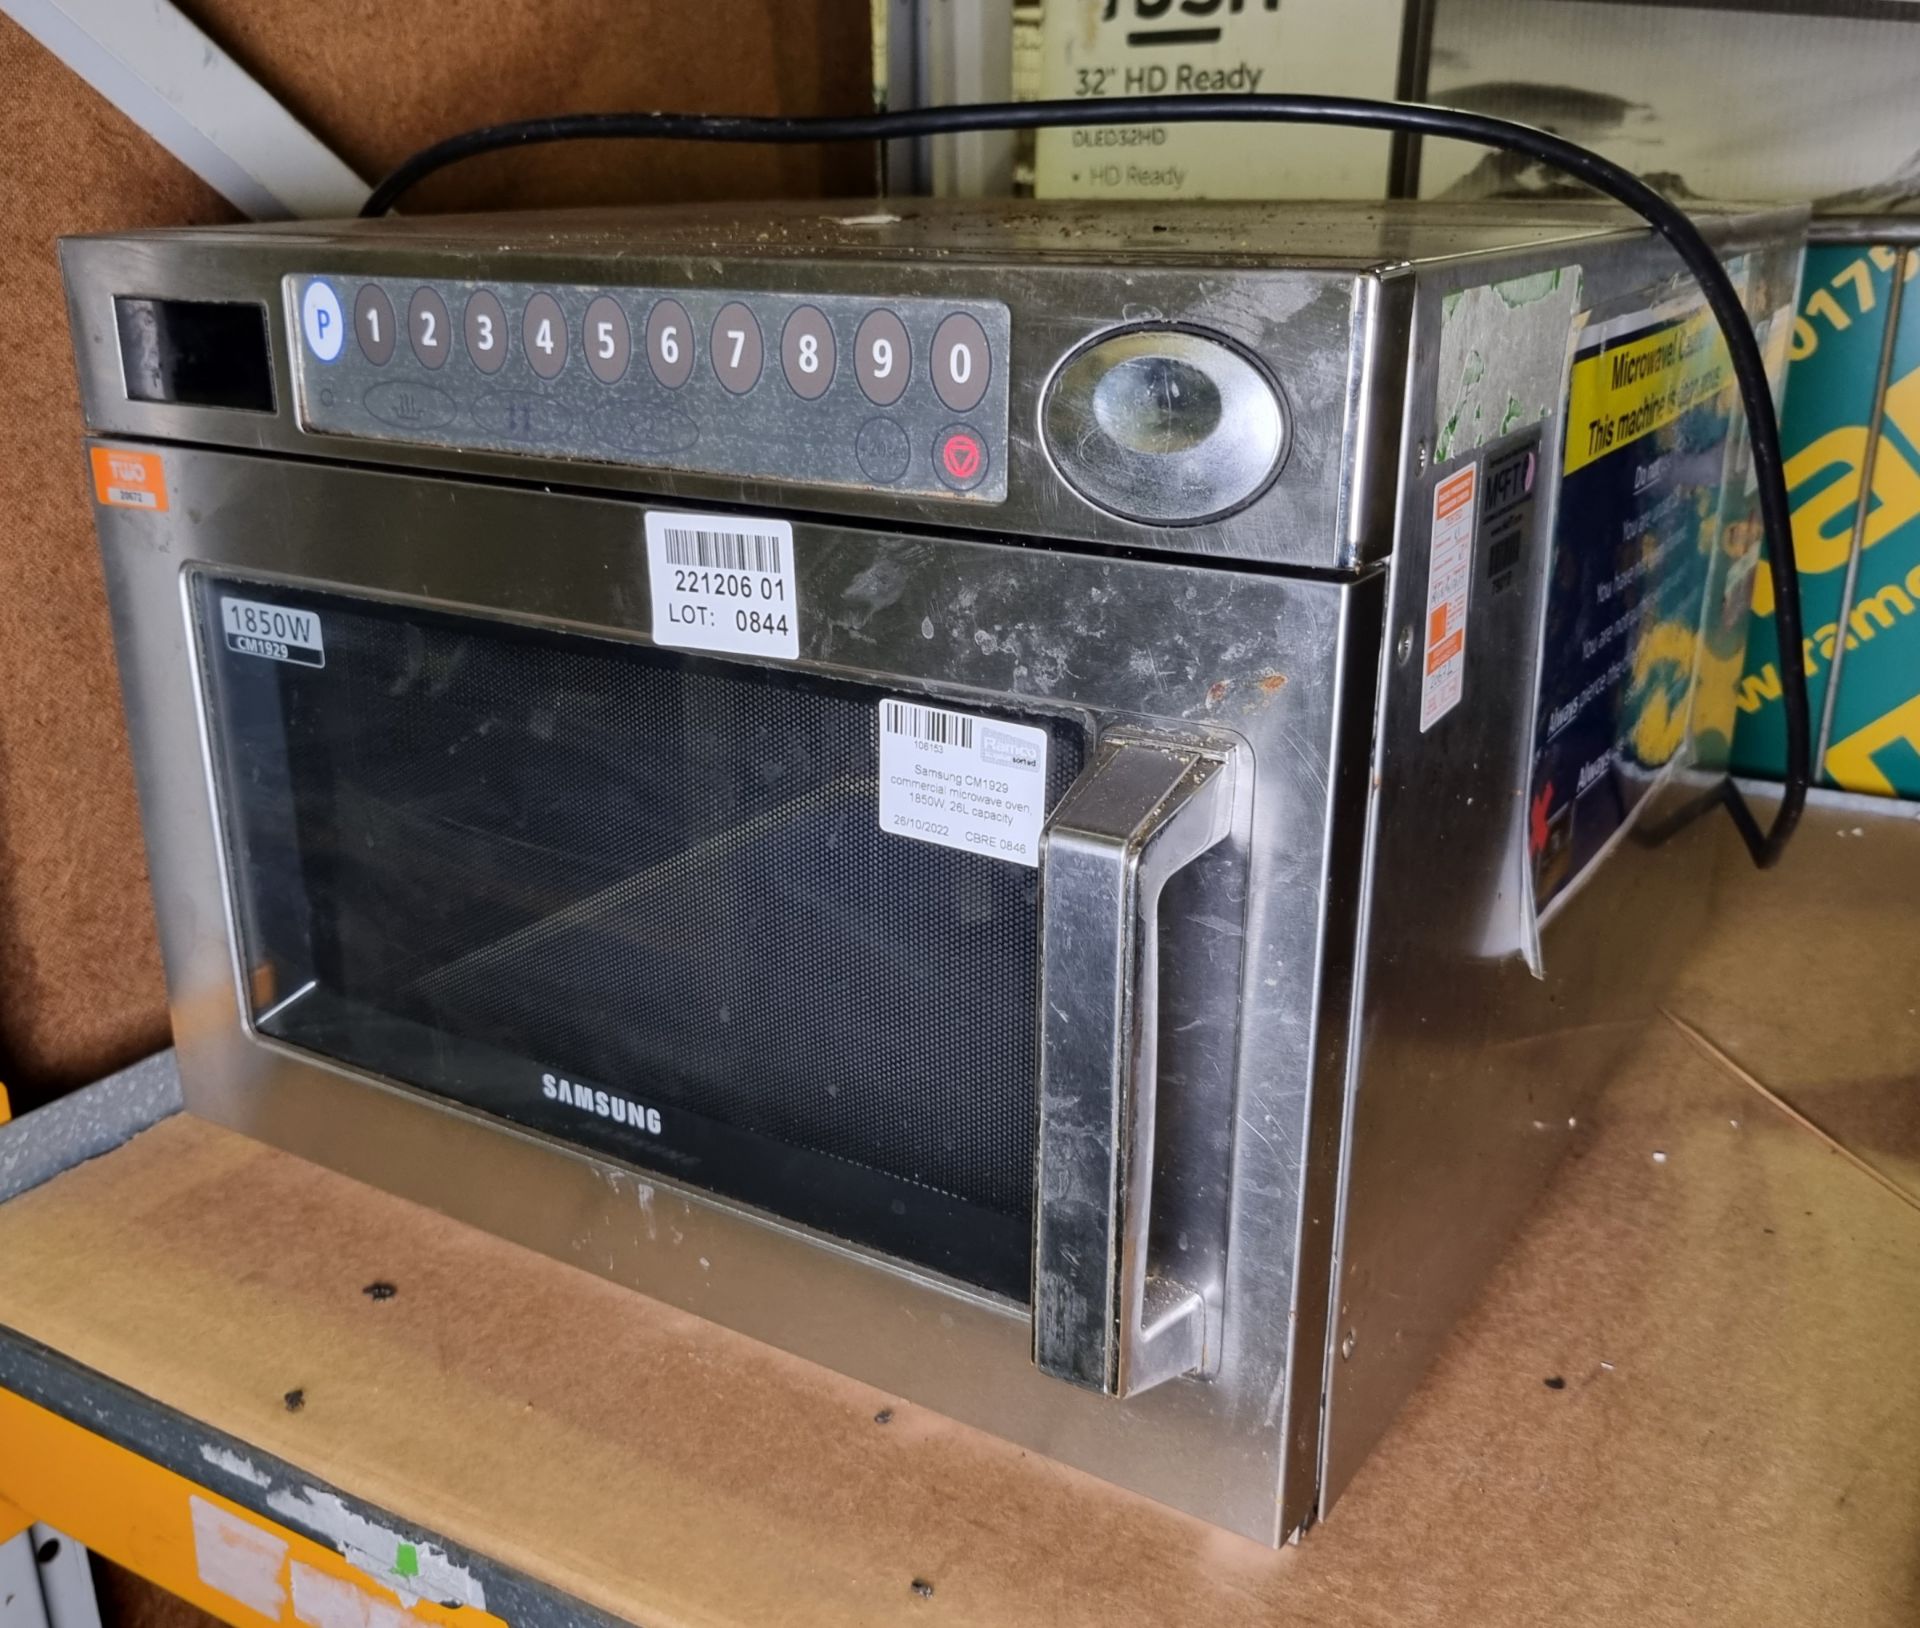 Samsung CM1929 commercial microwave oven, 1850W, 26L capacity - Image 3 of 4